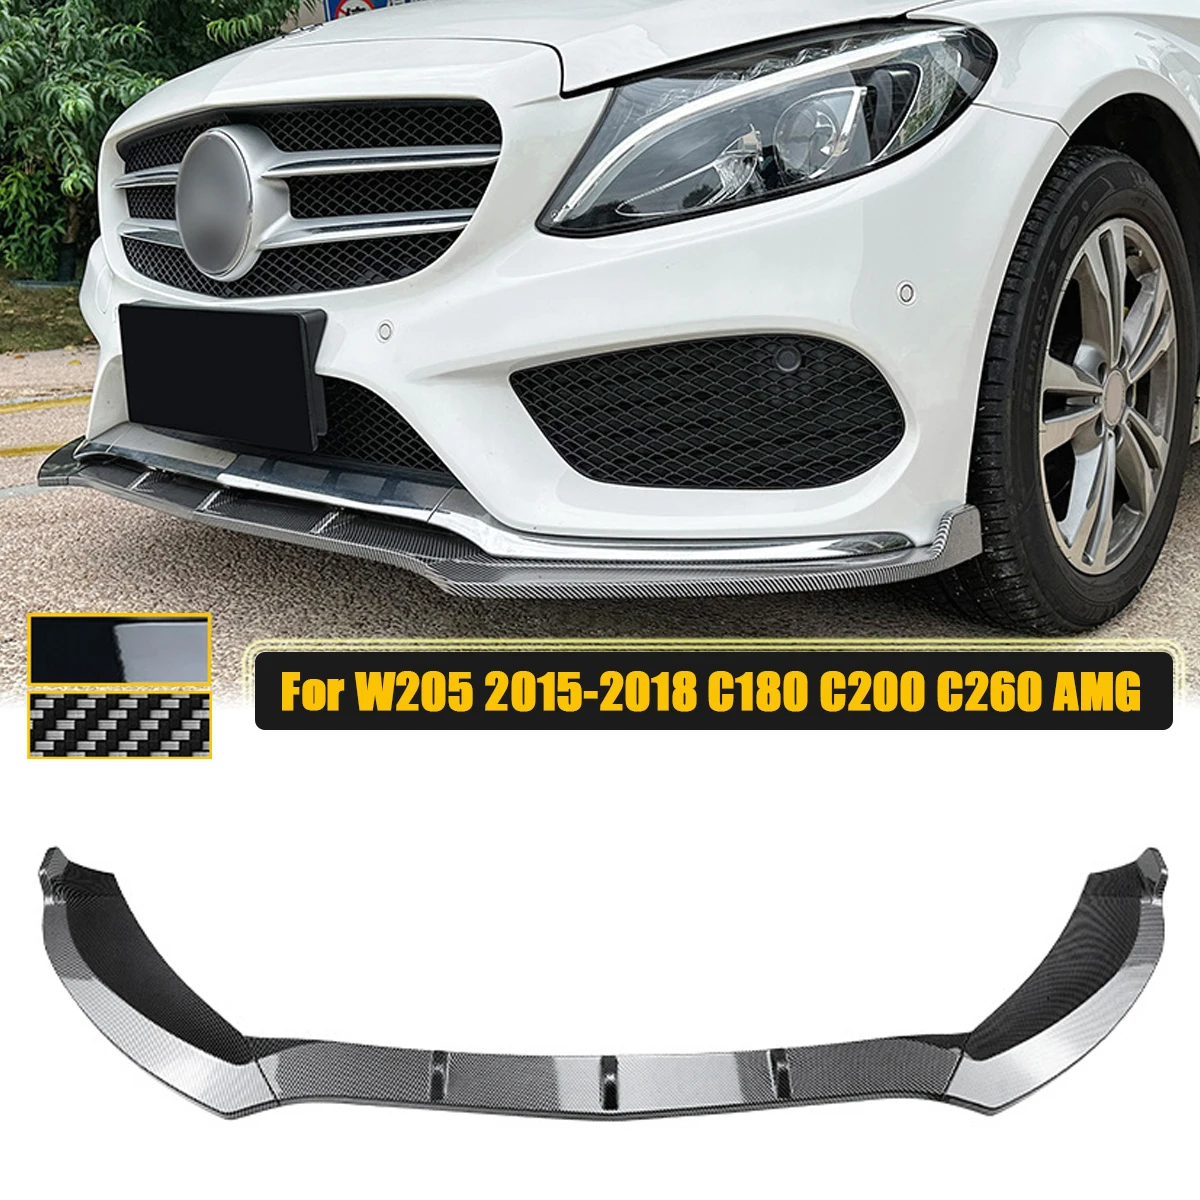 

For Mercedes Benz W205 2015-2018 C180 C200 C260 AMG Front Bumper Lip Side Splitter Canards Spoiler Body Kit Guards Car Styling